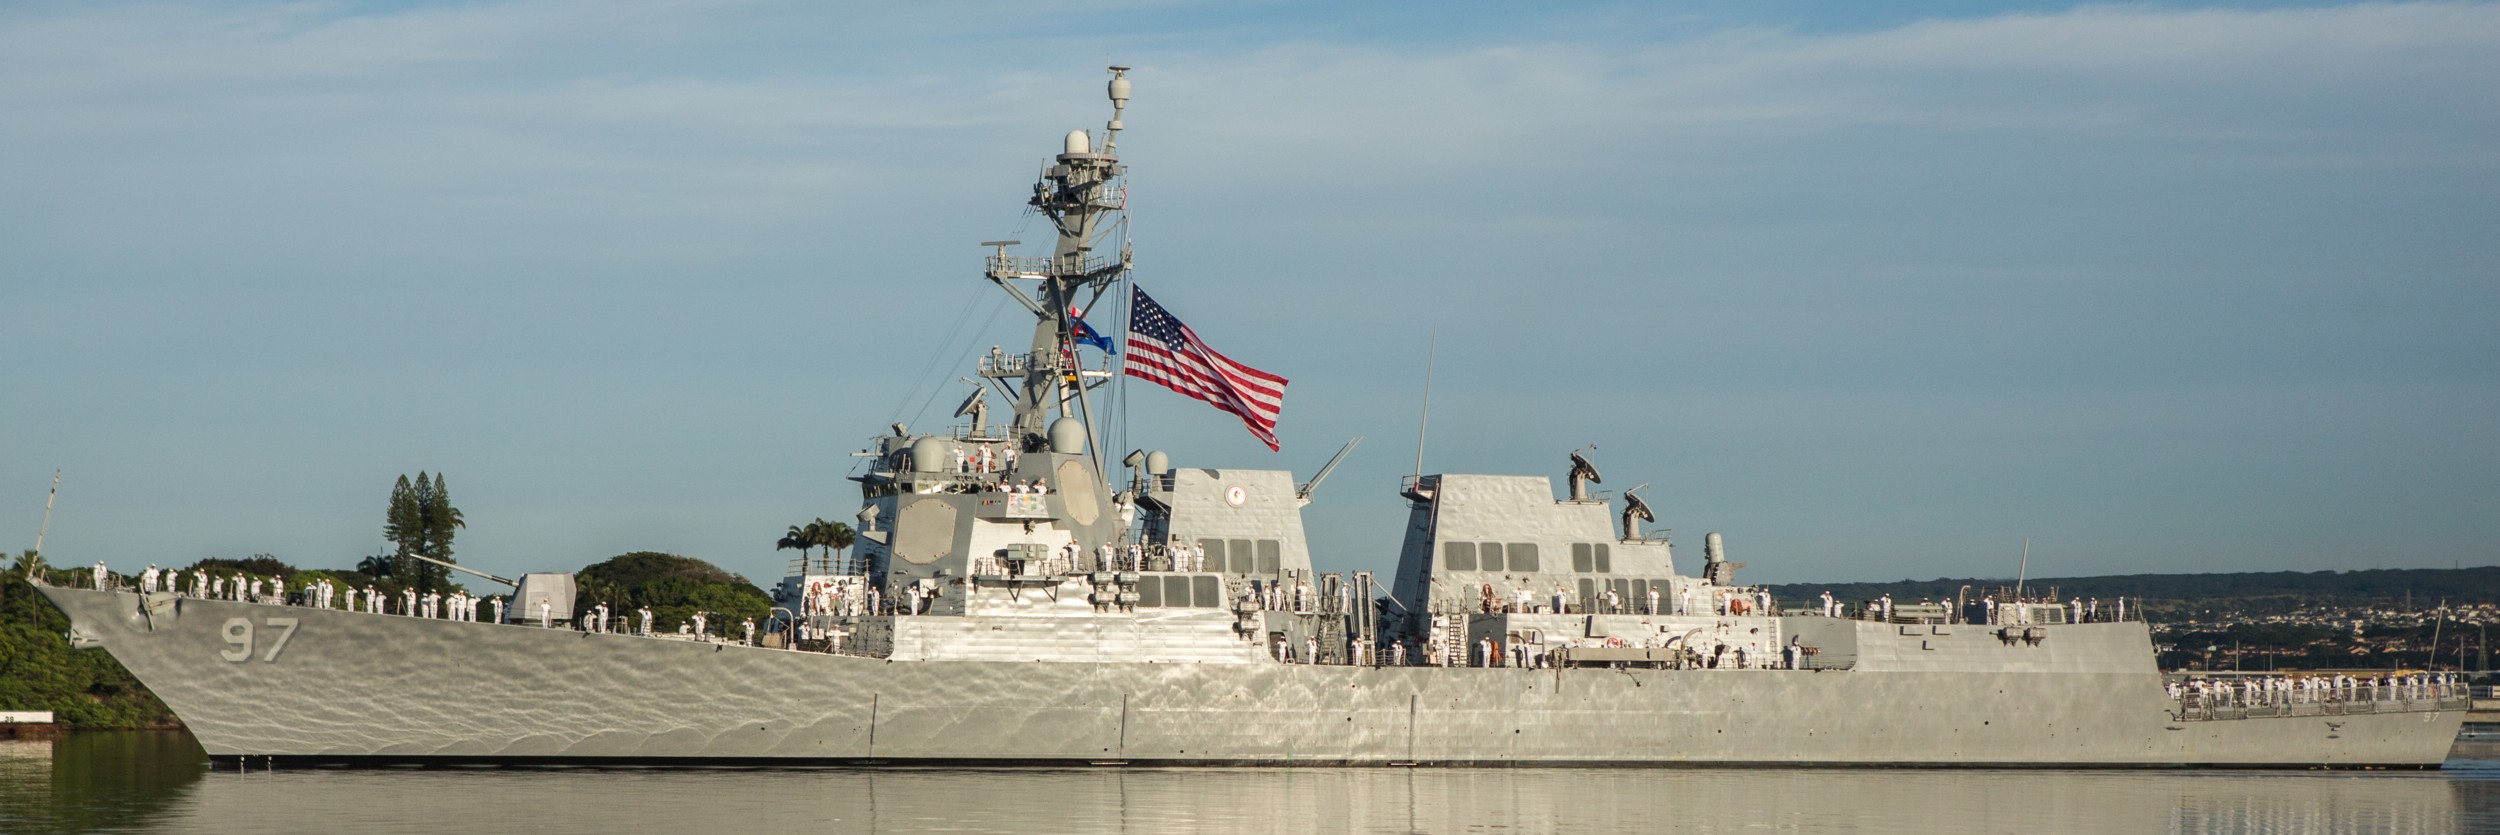 ddg-97 uss halsey arleigh burke class guided missile destroyer pearl harbor remembrance 2016 45